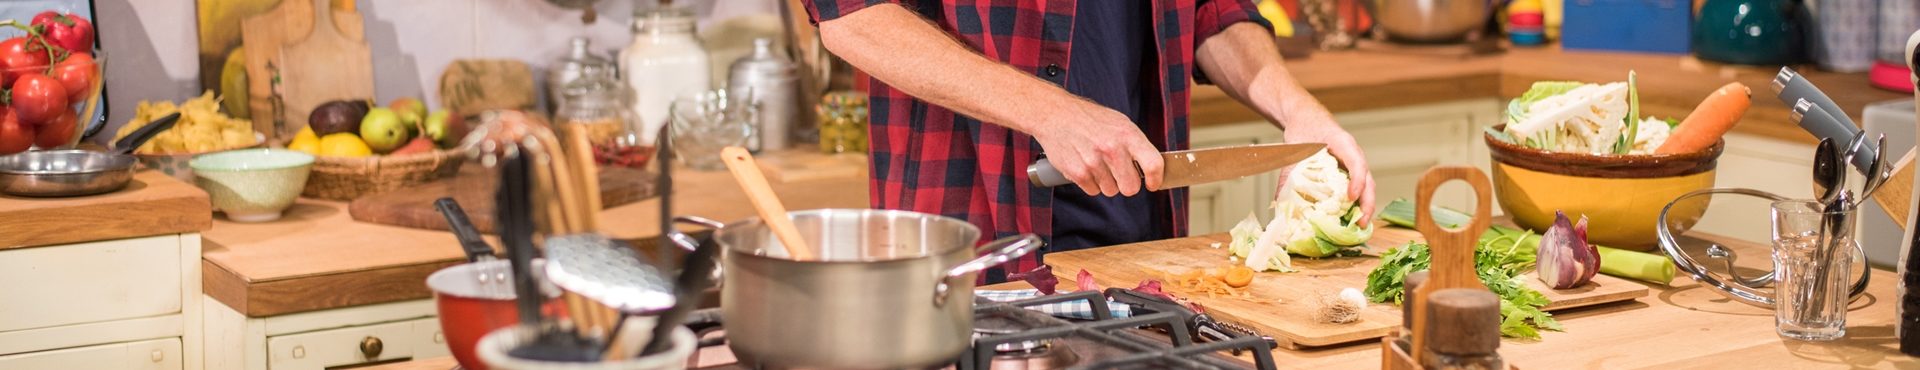 Image showing hands of man cooking food during a virtual cookery event